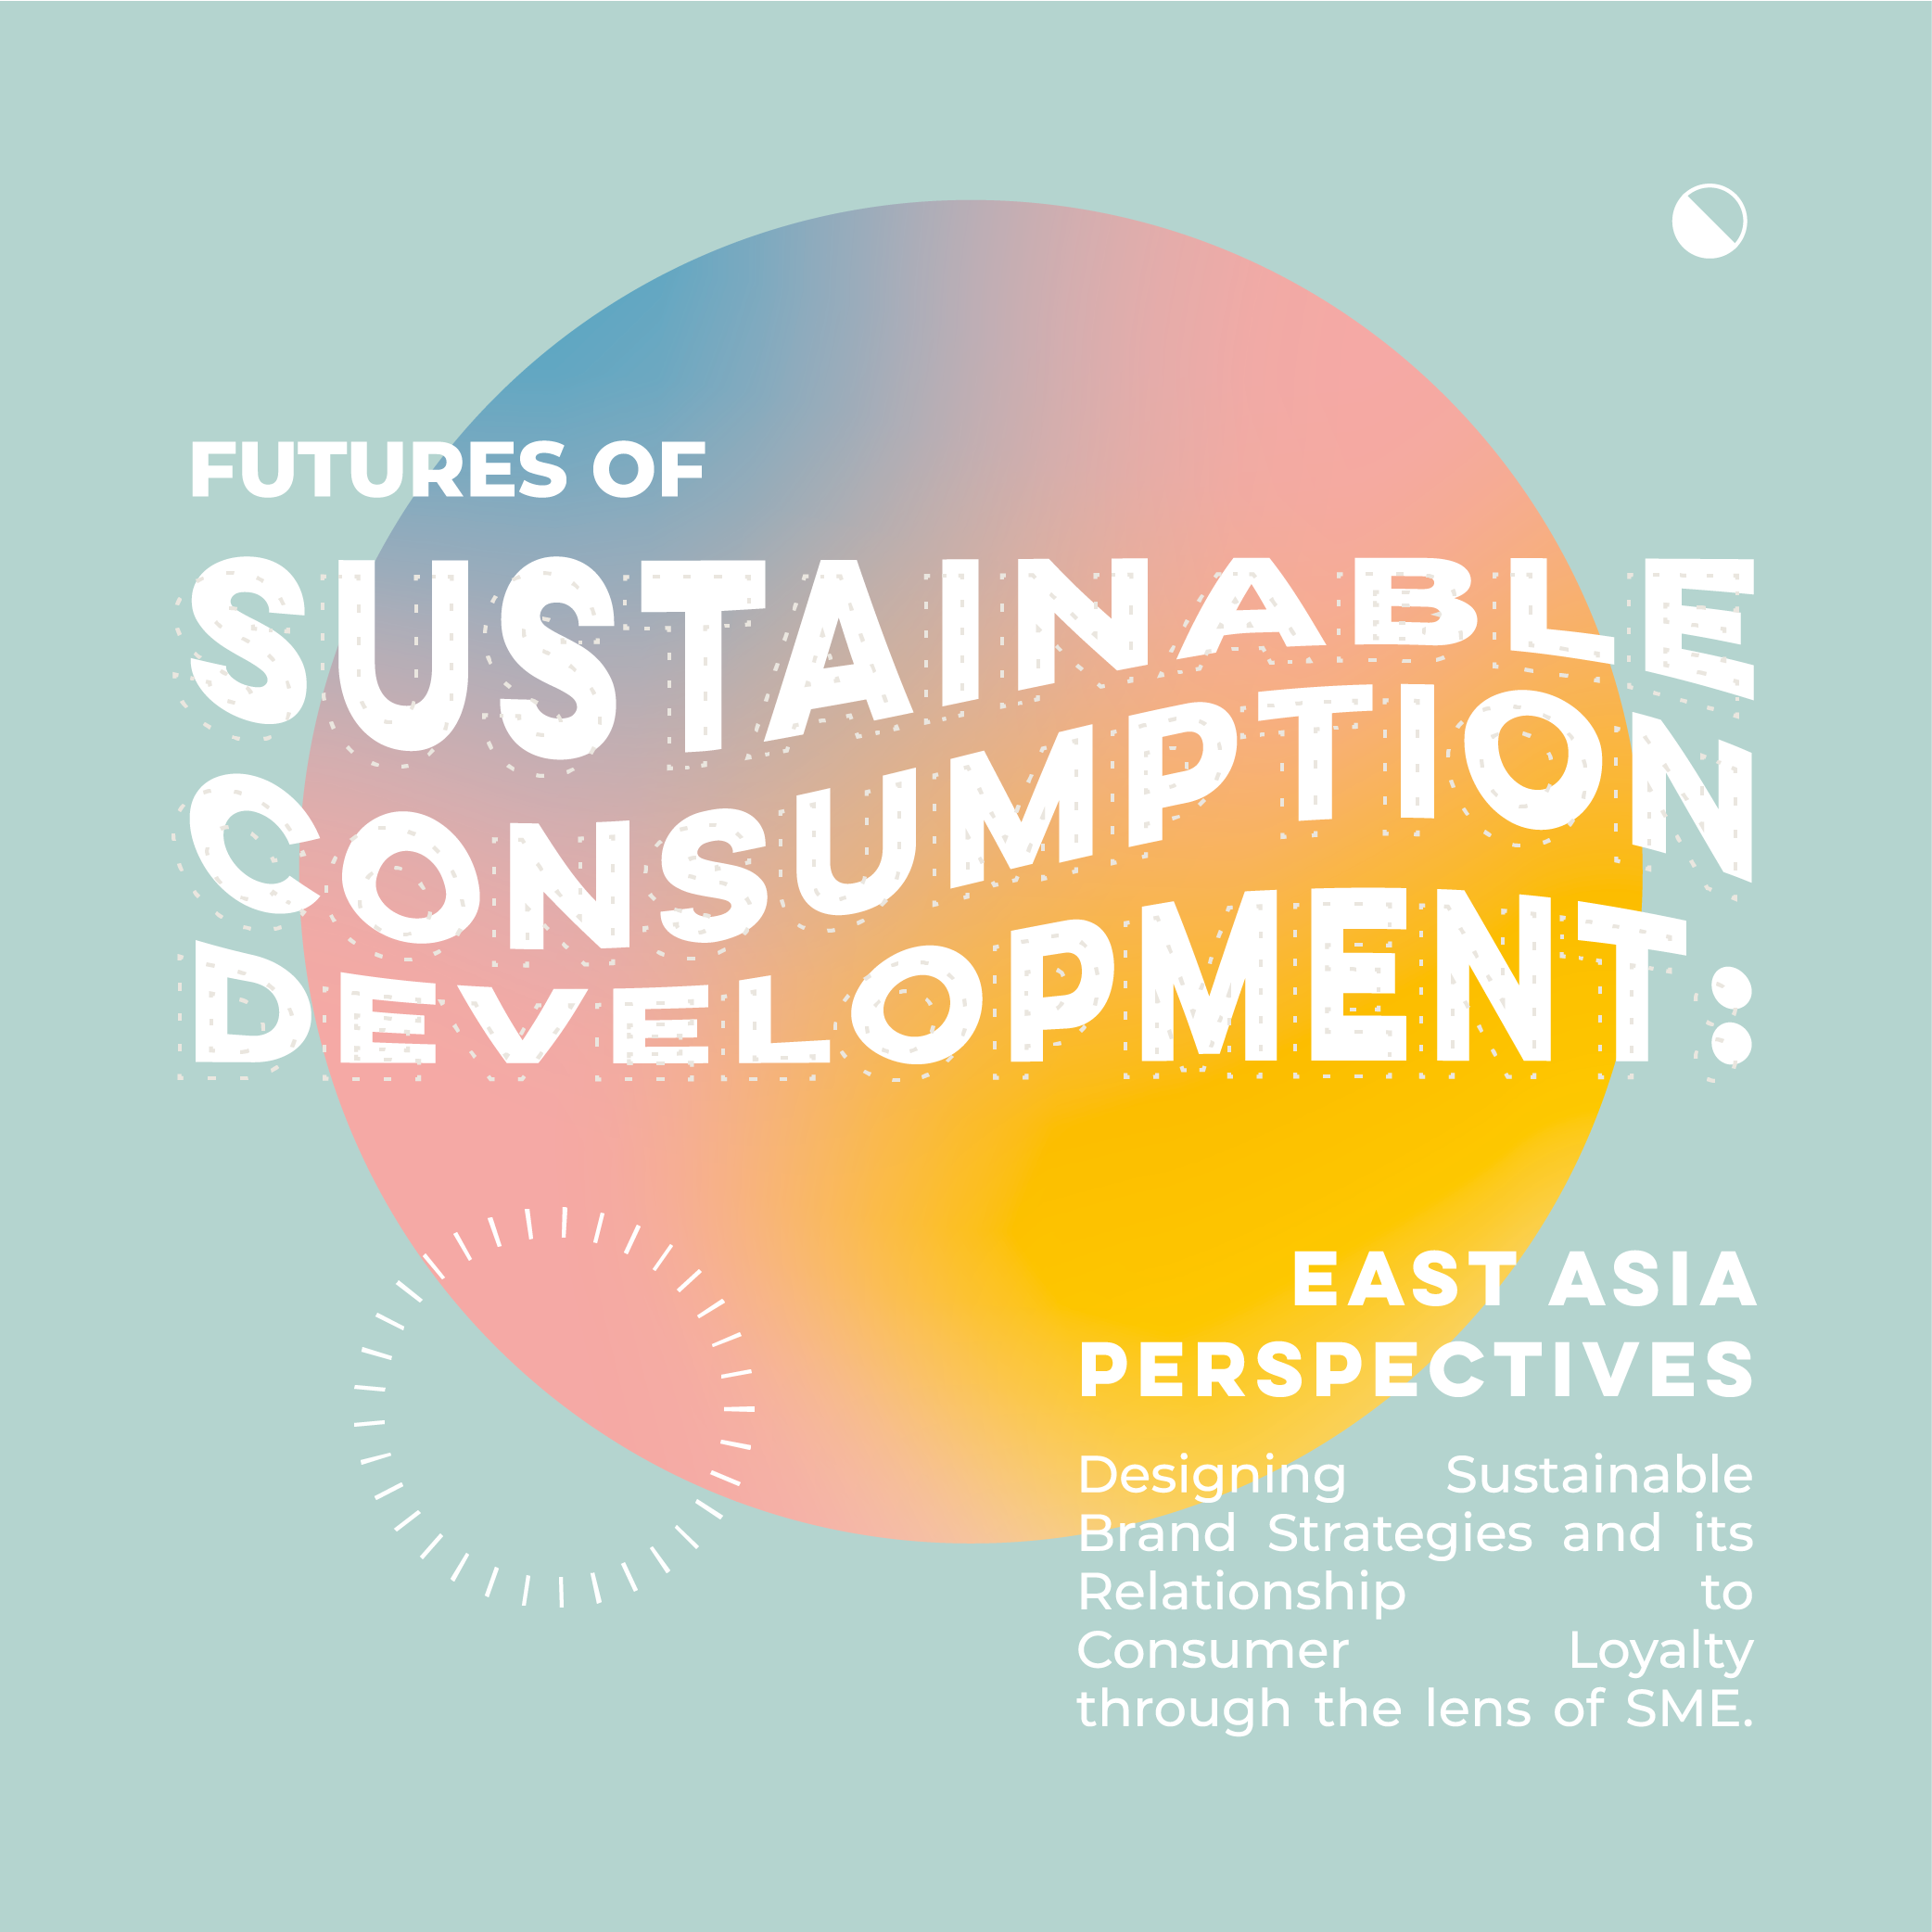 Futures of sustainable consumption development: East Asia Perspectives